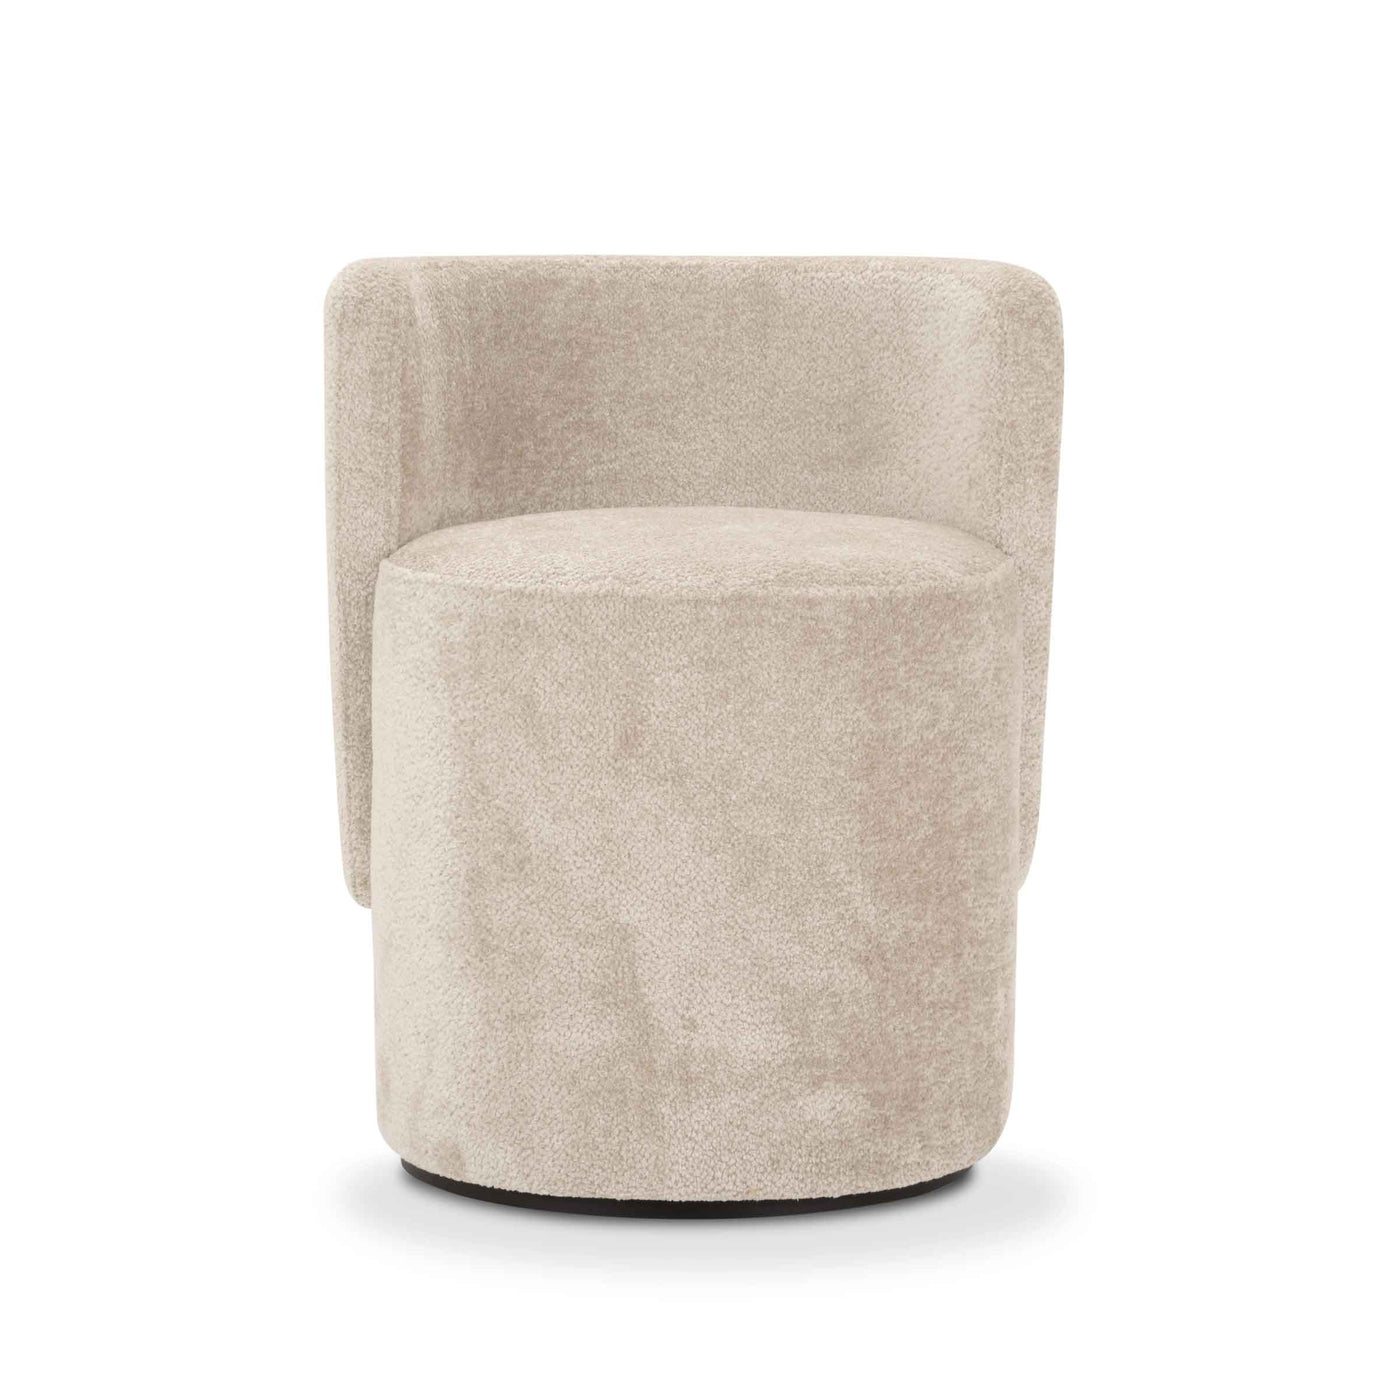 Armchair BOLL by Simone Micheli for Adrenalina 01